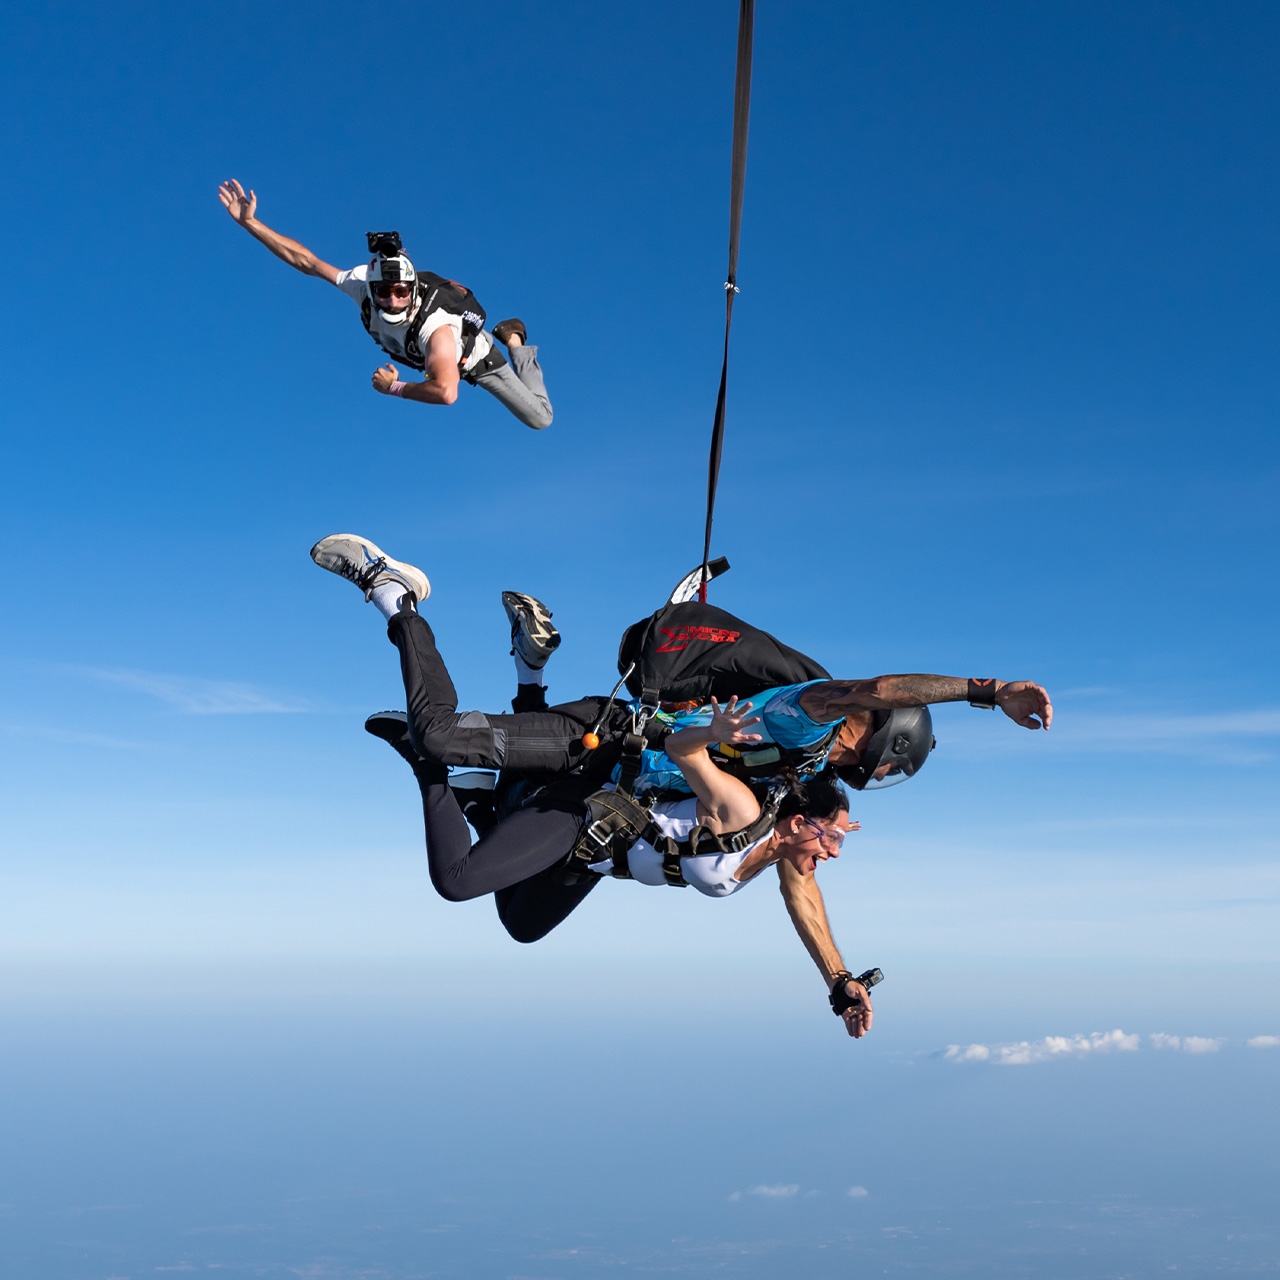 A tandem instructor and female passenger in freefall while a videographer flies around.